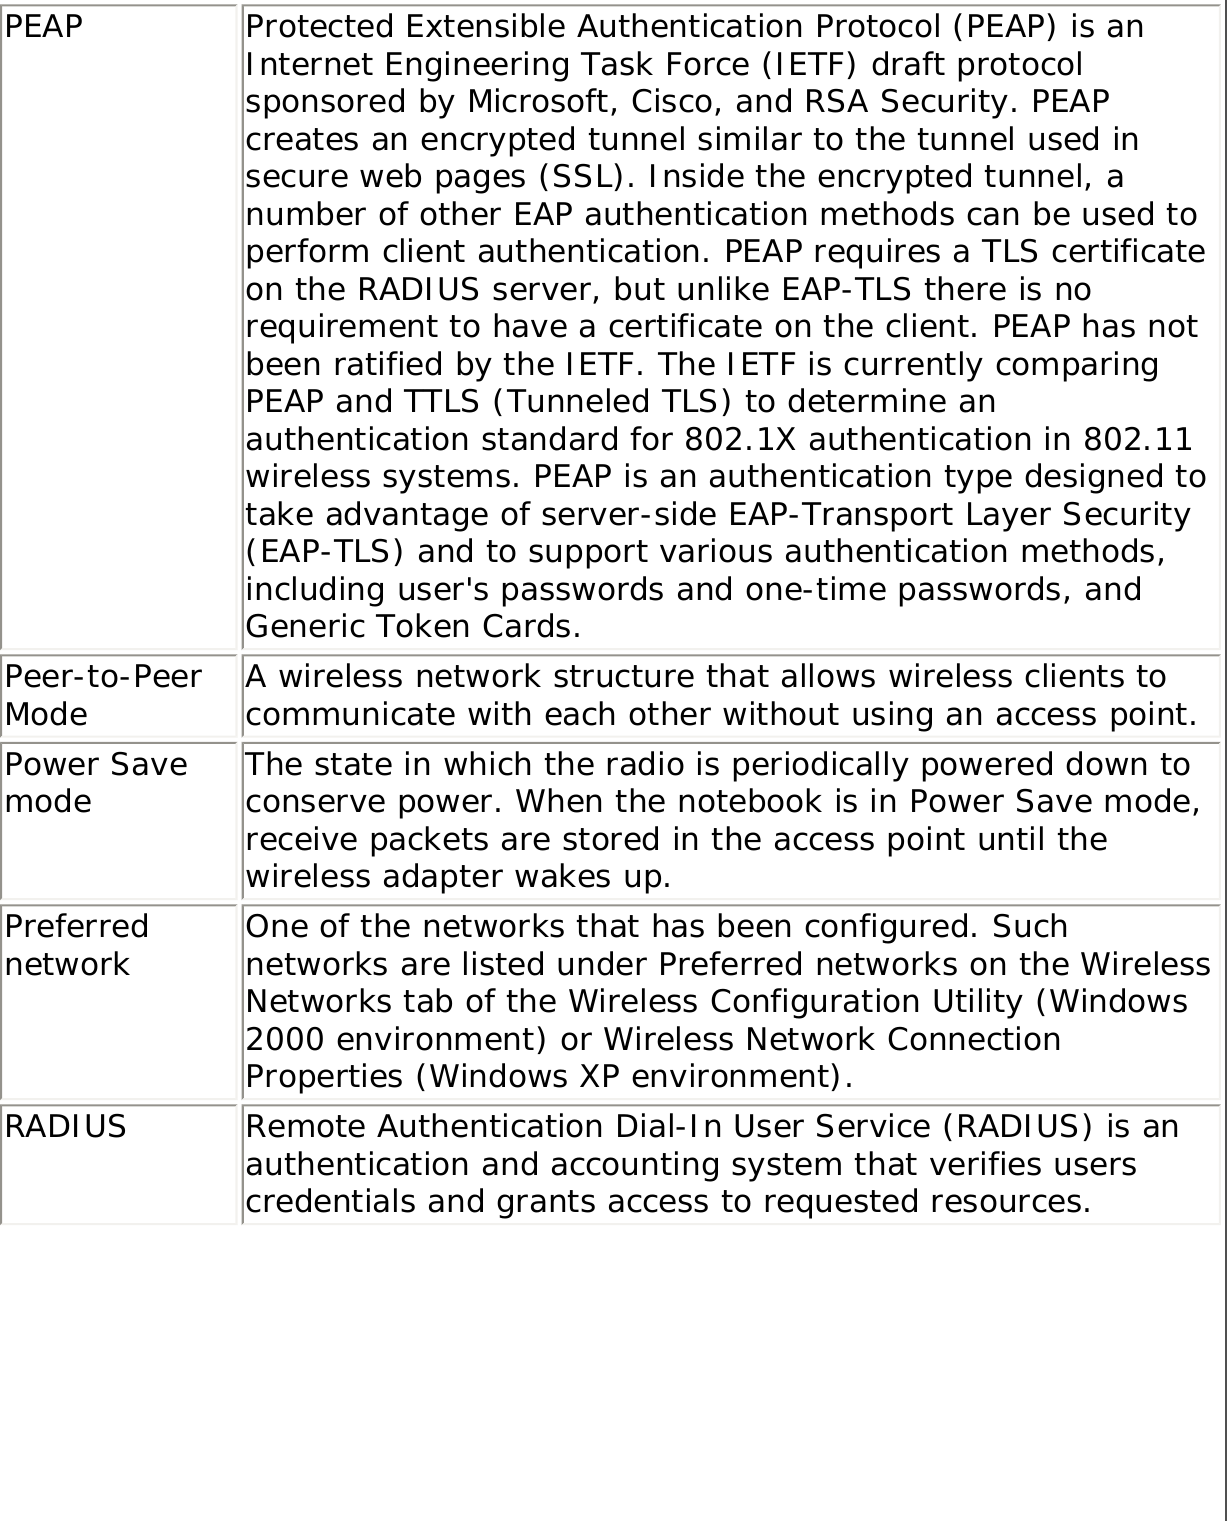 PEAP Protected Extensible Authentication Protocol (PEAP) is an Internet Engineering Task Force (IETF) draft protocol sponsored by Microsoft, Cisco, and RSA Security. PEAP creates an encrypted tunnel similar to the tunnel used in secure web pages (SSL). Inside the encrypted tunnel, a number of other EAP authentication methods can be used to perform client authentication. PEAP requires a TLS certificate on the RADIUS server, but unlike EAP-TLS there is no requirement to have a certificate on the client. PEAP has not been ratified by the IETF. The IETF is currently comparing PEAP and TTLS (Tunneled TLS) to determine an authentication standard for 802.1X authentication in 802.11 wireless systems. PEAP is an authentication type designed to take advantage of server-side EAP-Transport Layer Security (EAP-TLS) and to support various authentication methods, including user&apos;s passwords and one-time passwords, and Generic Token Cards.Peer-to-Peer Mode A wireless network structure that allows wireless clients to communicate with each other without using an access point. Power Save mode The state in which the radio is periodically powered down to conserve power. When the notebook is in Power Save mode, receive packets are stored in the access point until the wireless adapter wakes up.Preferred network One of the networks that has been configured. Such networks are listed under Preferred networks on the Wireless Networks tab of the Wireless Configuration Utility (Windows 2000 environment) or Wireless Network Connection Properties (Windows XP environment).RADIUS Remote Authentication Dial-In User Service (RADIUS) is an authentication and accounting system that verifies users credentials and grants access to requested resources.